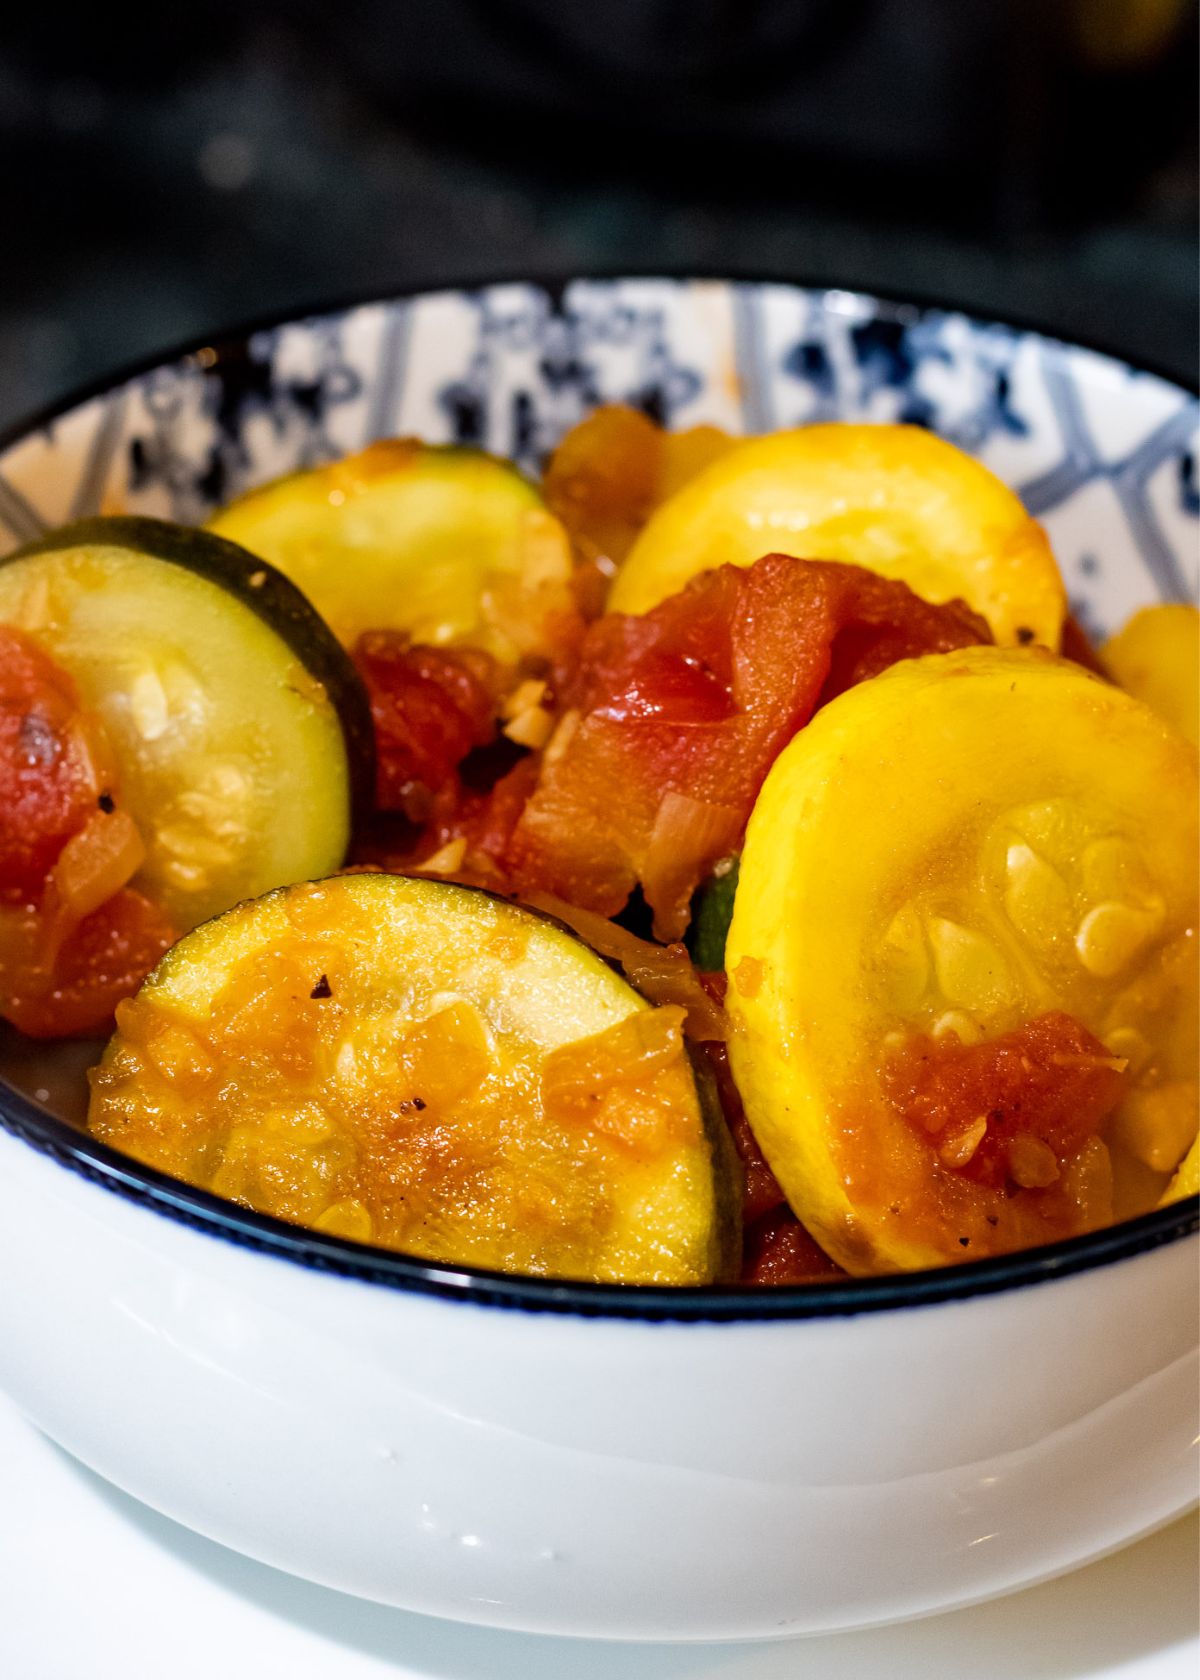 Close up of a bowl with zucchini, squash and tomatoes cooked together.